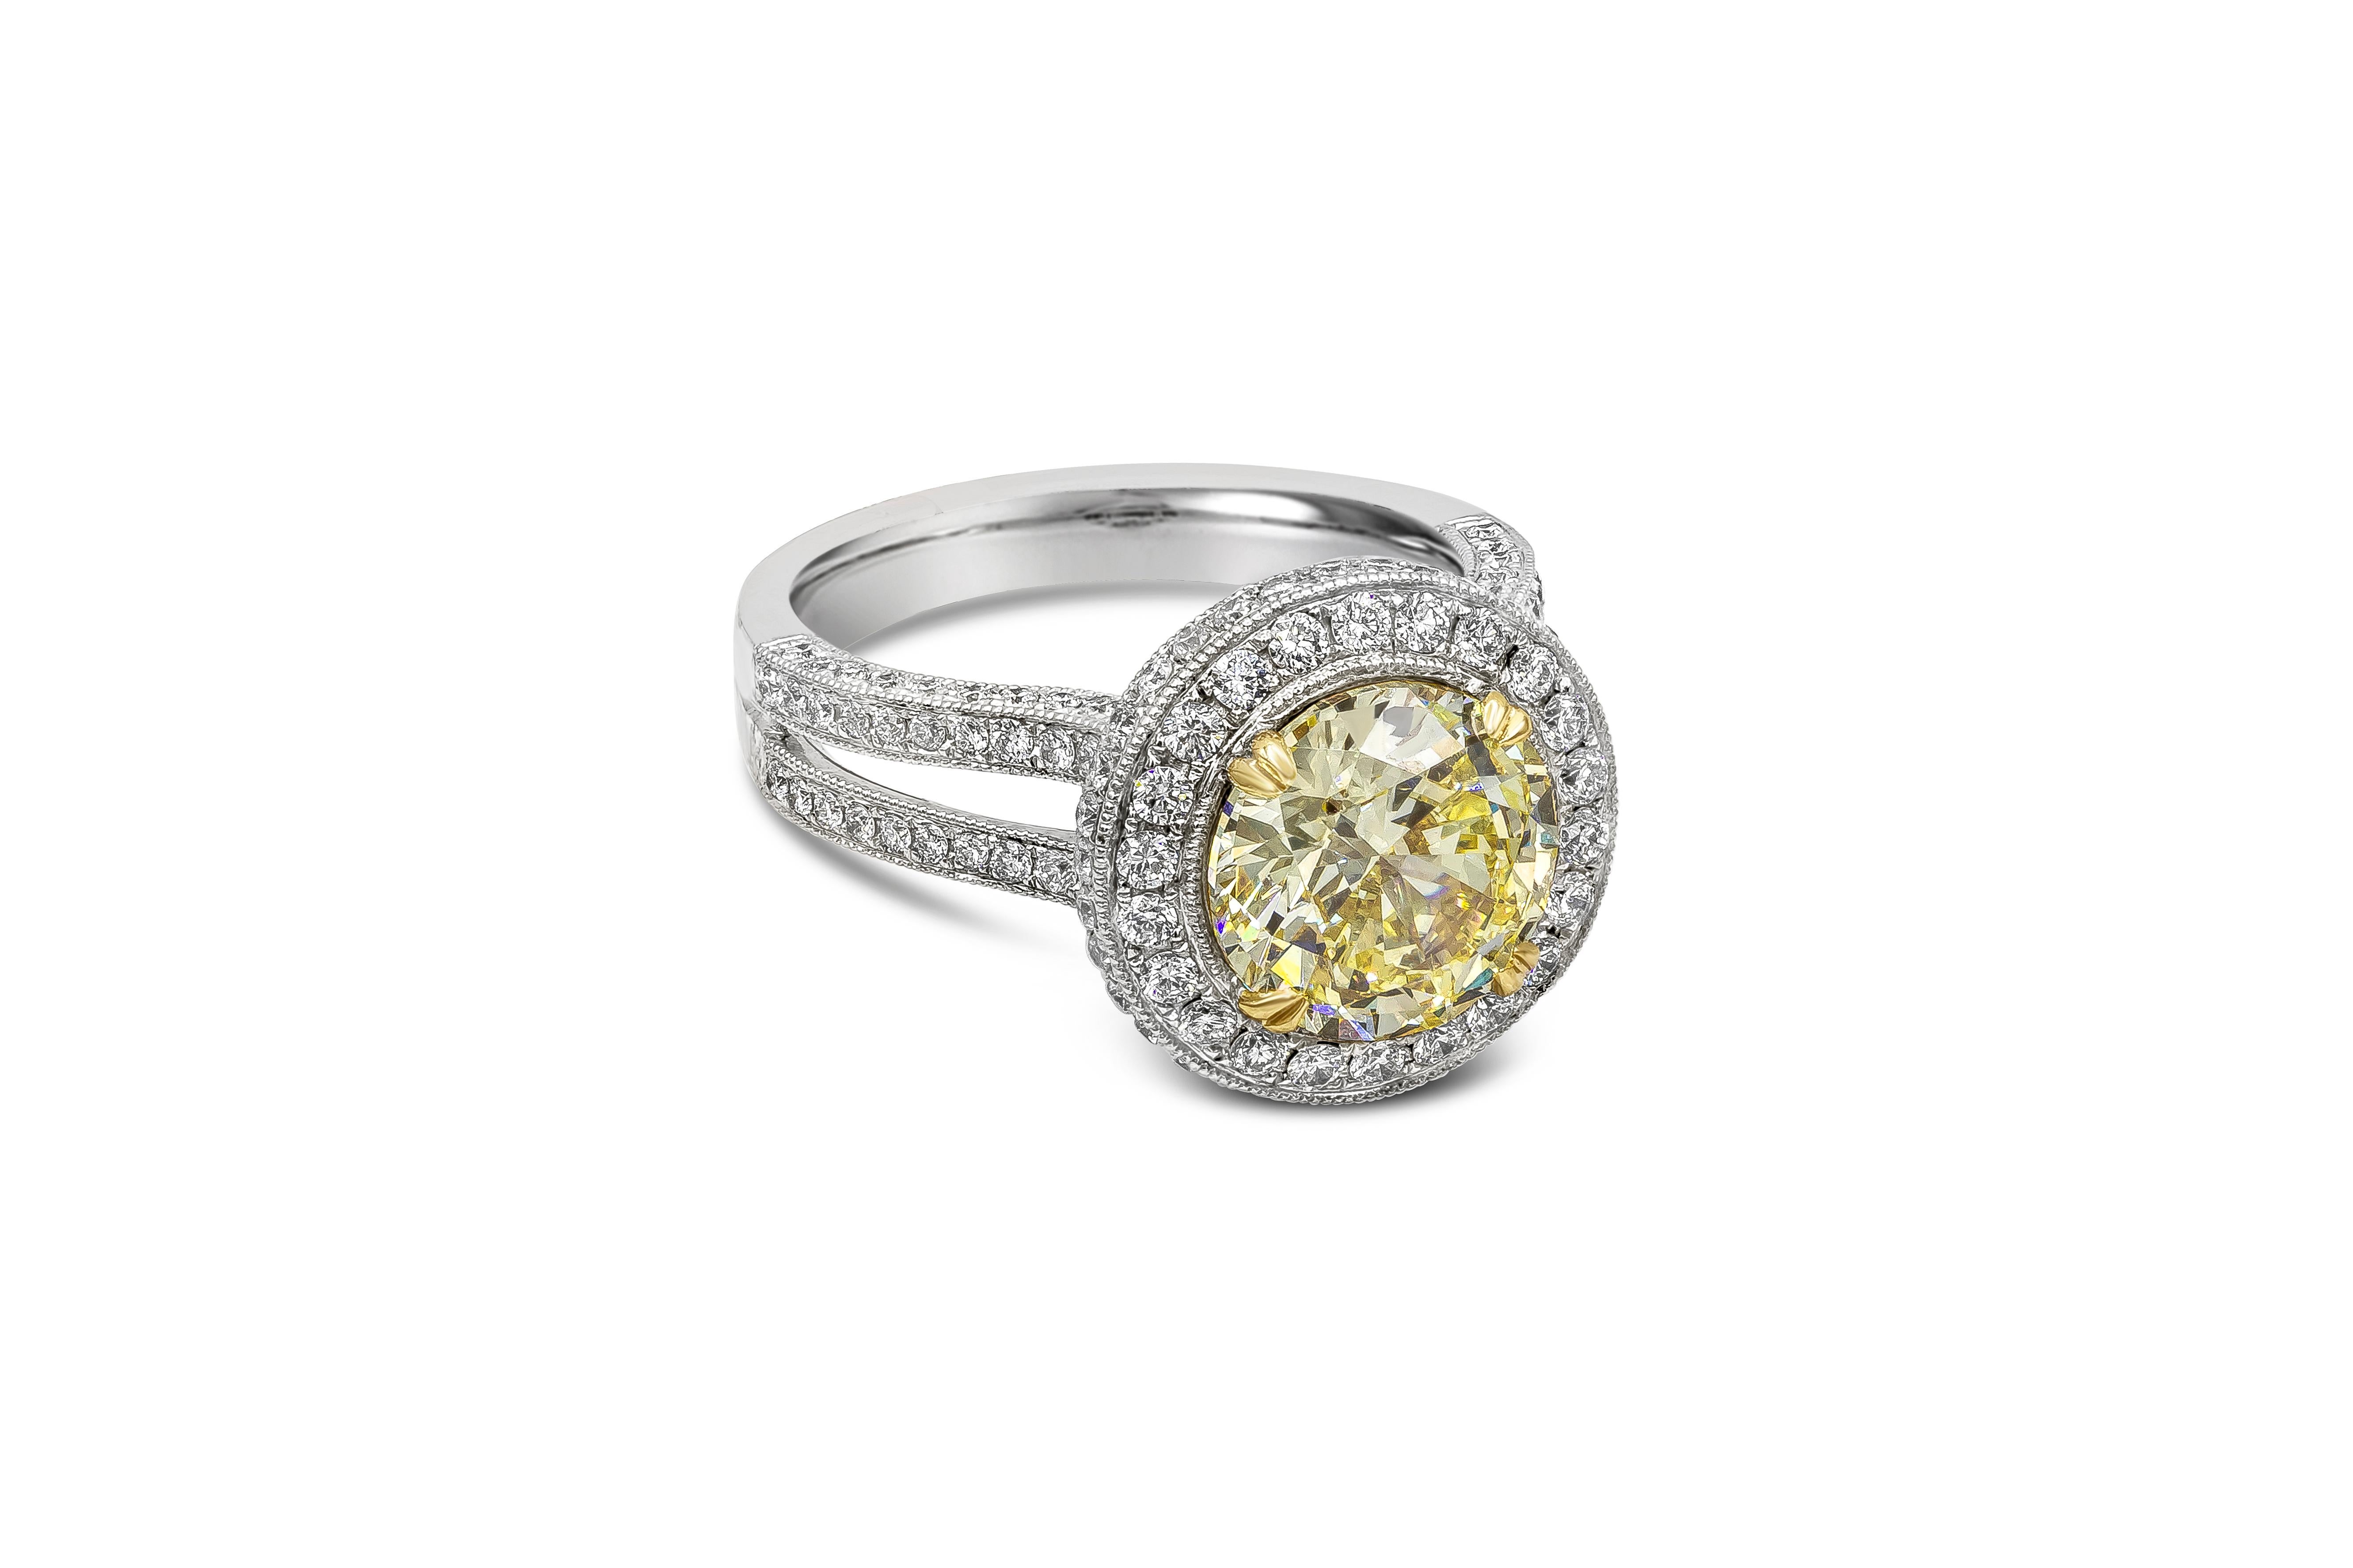 A vintage looking engagement ring showcasing a GIA certified 3.08 carat round fancy yellow diamond, Accented with round melee diamond in a halo design weighing 1.04 carats total. SI1 in Clarity. Set in a diamond encrusted split-shank setting, Made